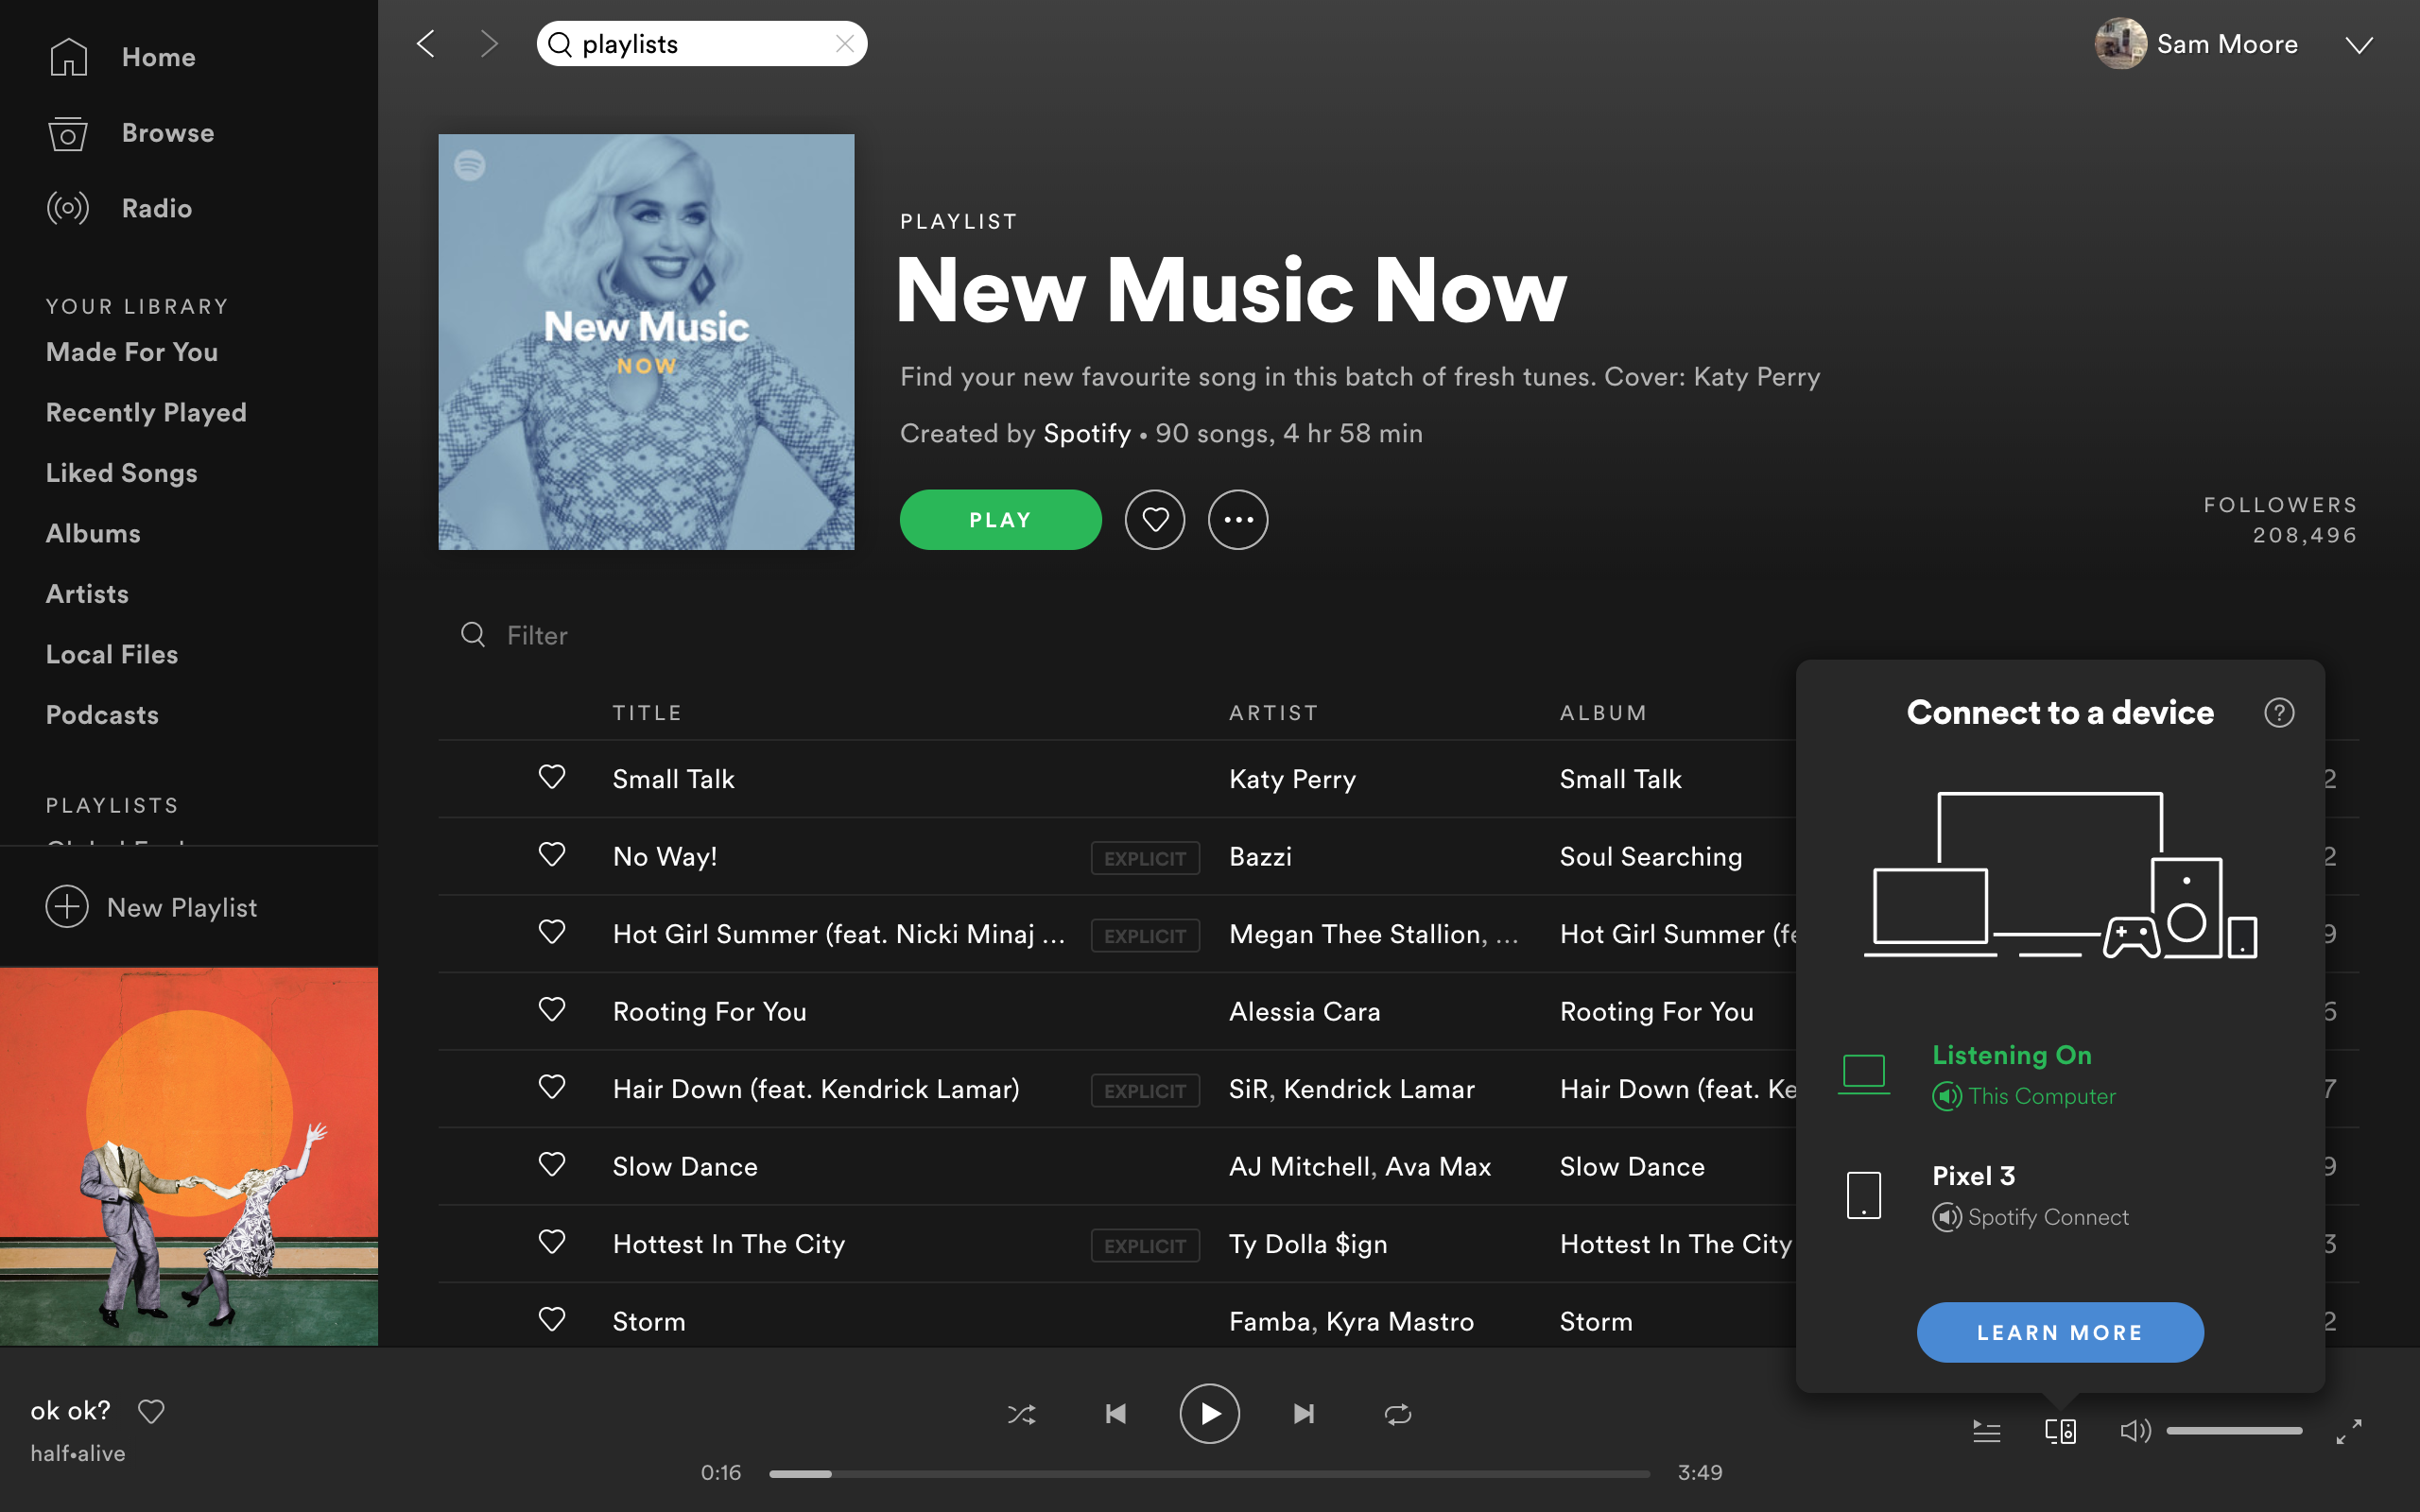 Spotify Music Streaming Service - Compared To iTunes, Google Music & Deezer